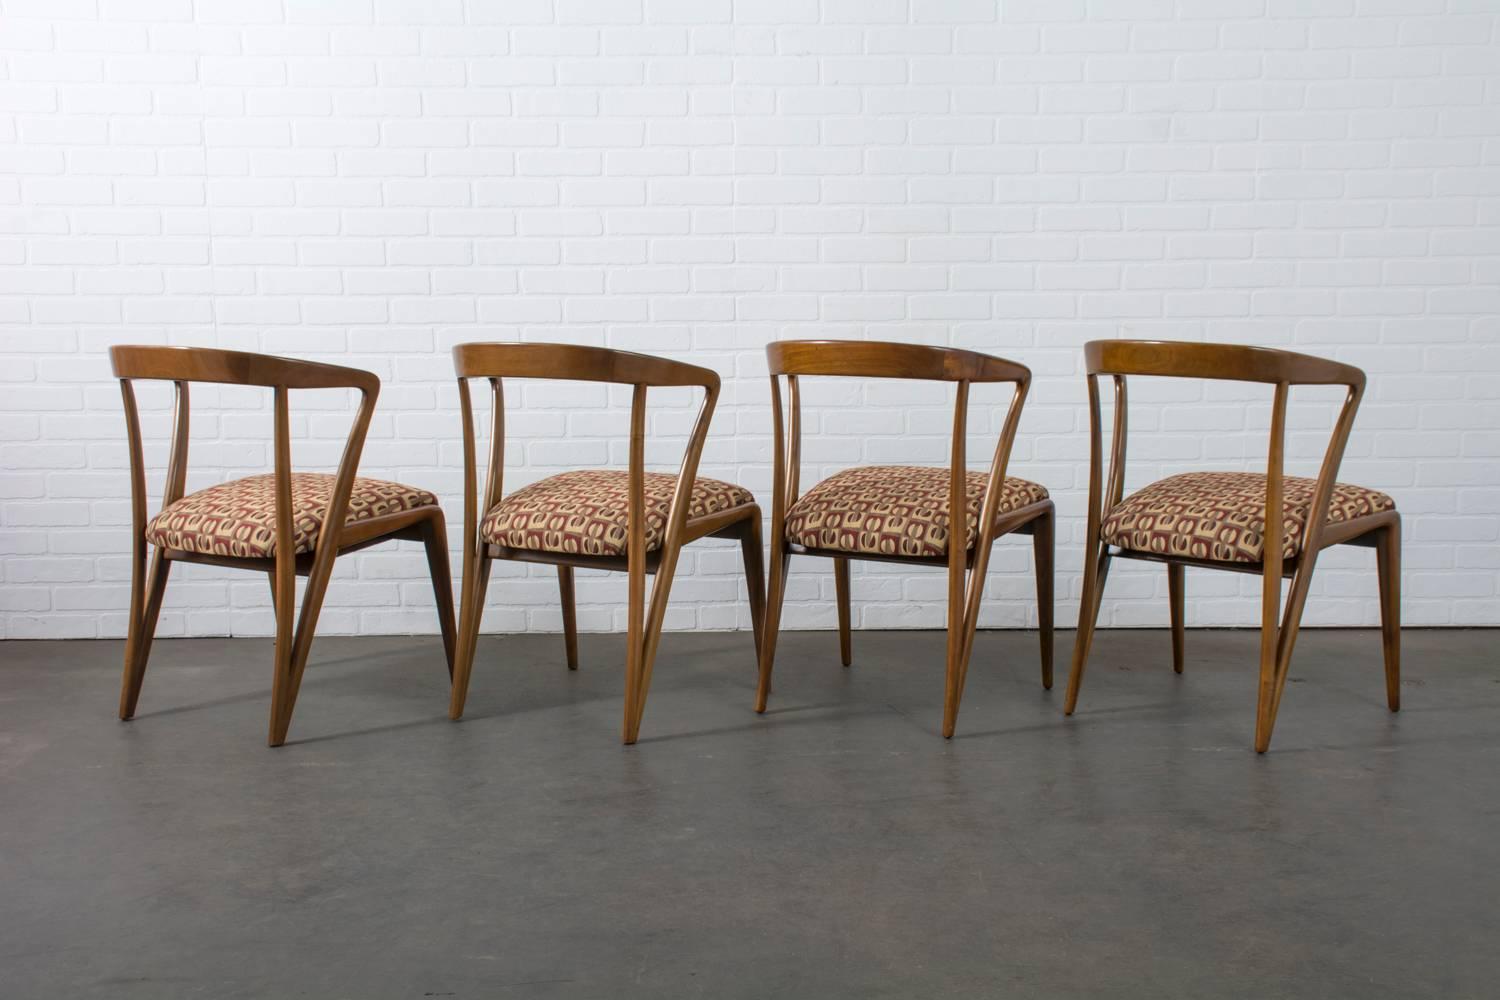 American Bertha Schaefer Set of Eight Vintage Mid-Century Dining Chairs, 1950s